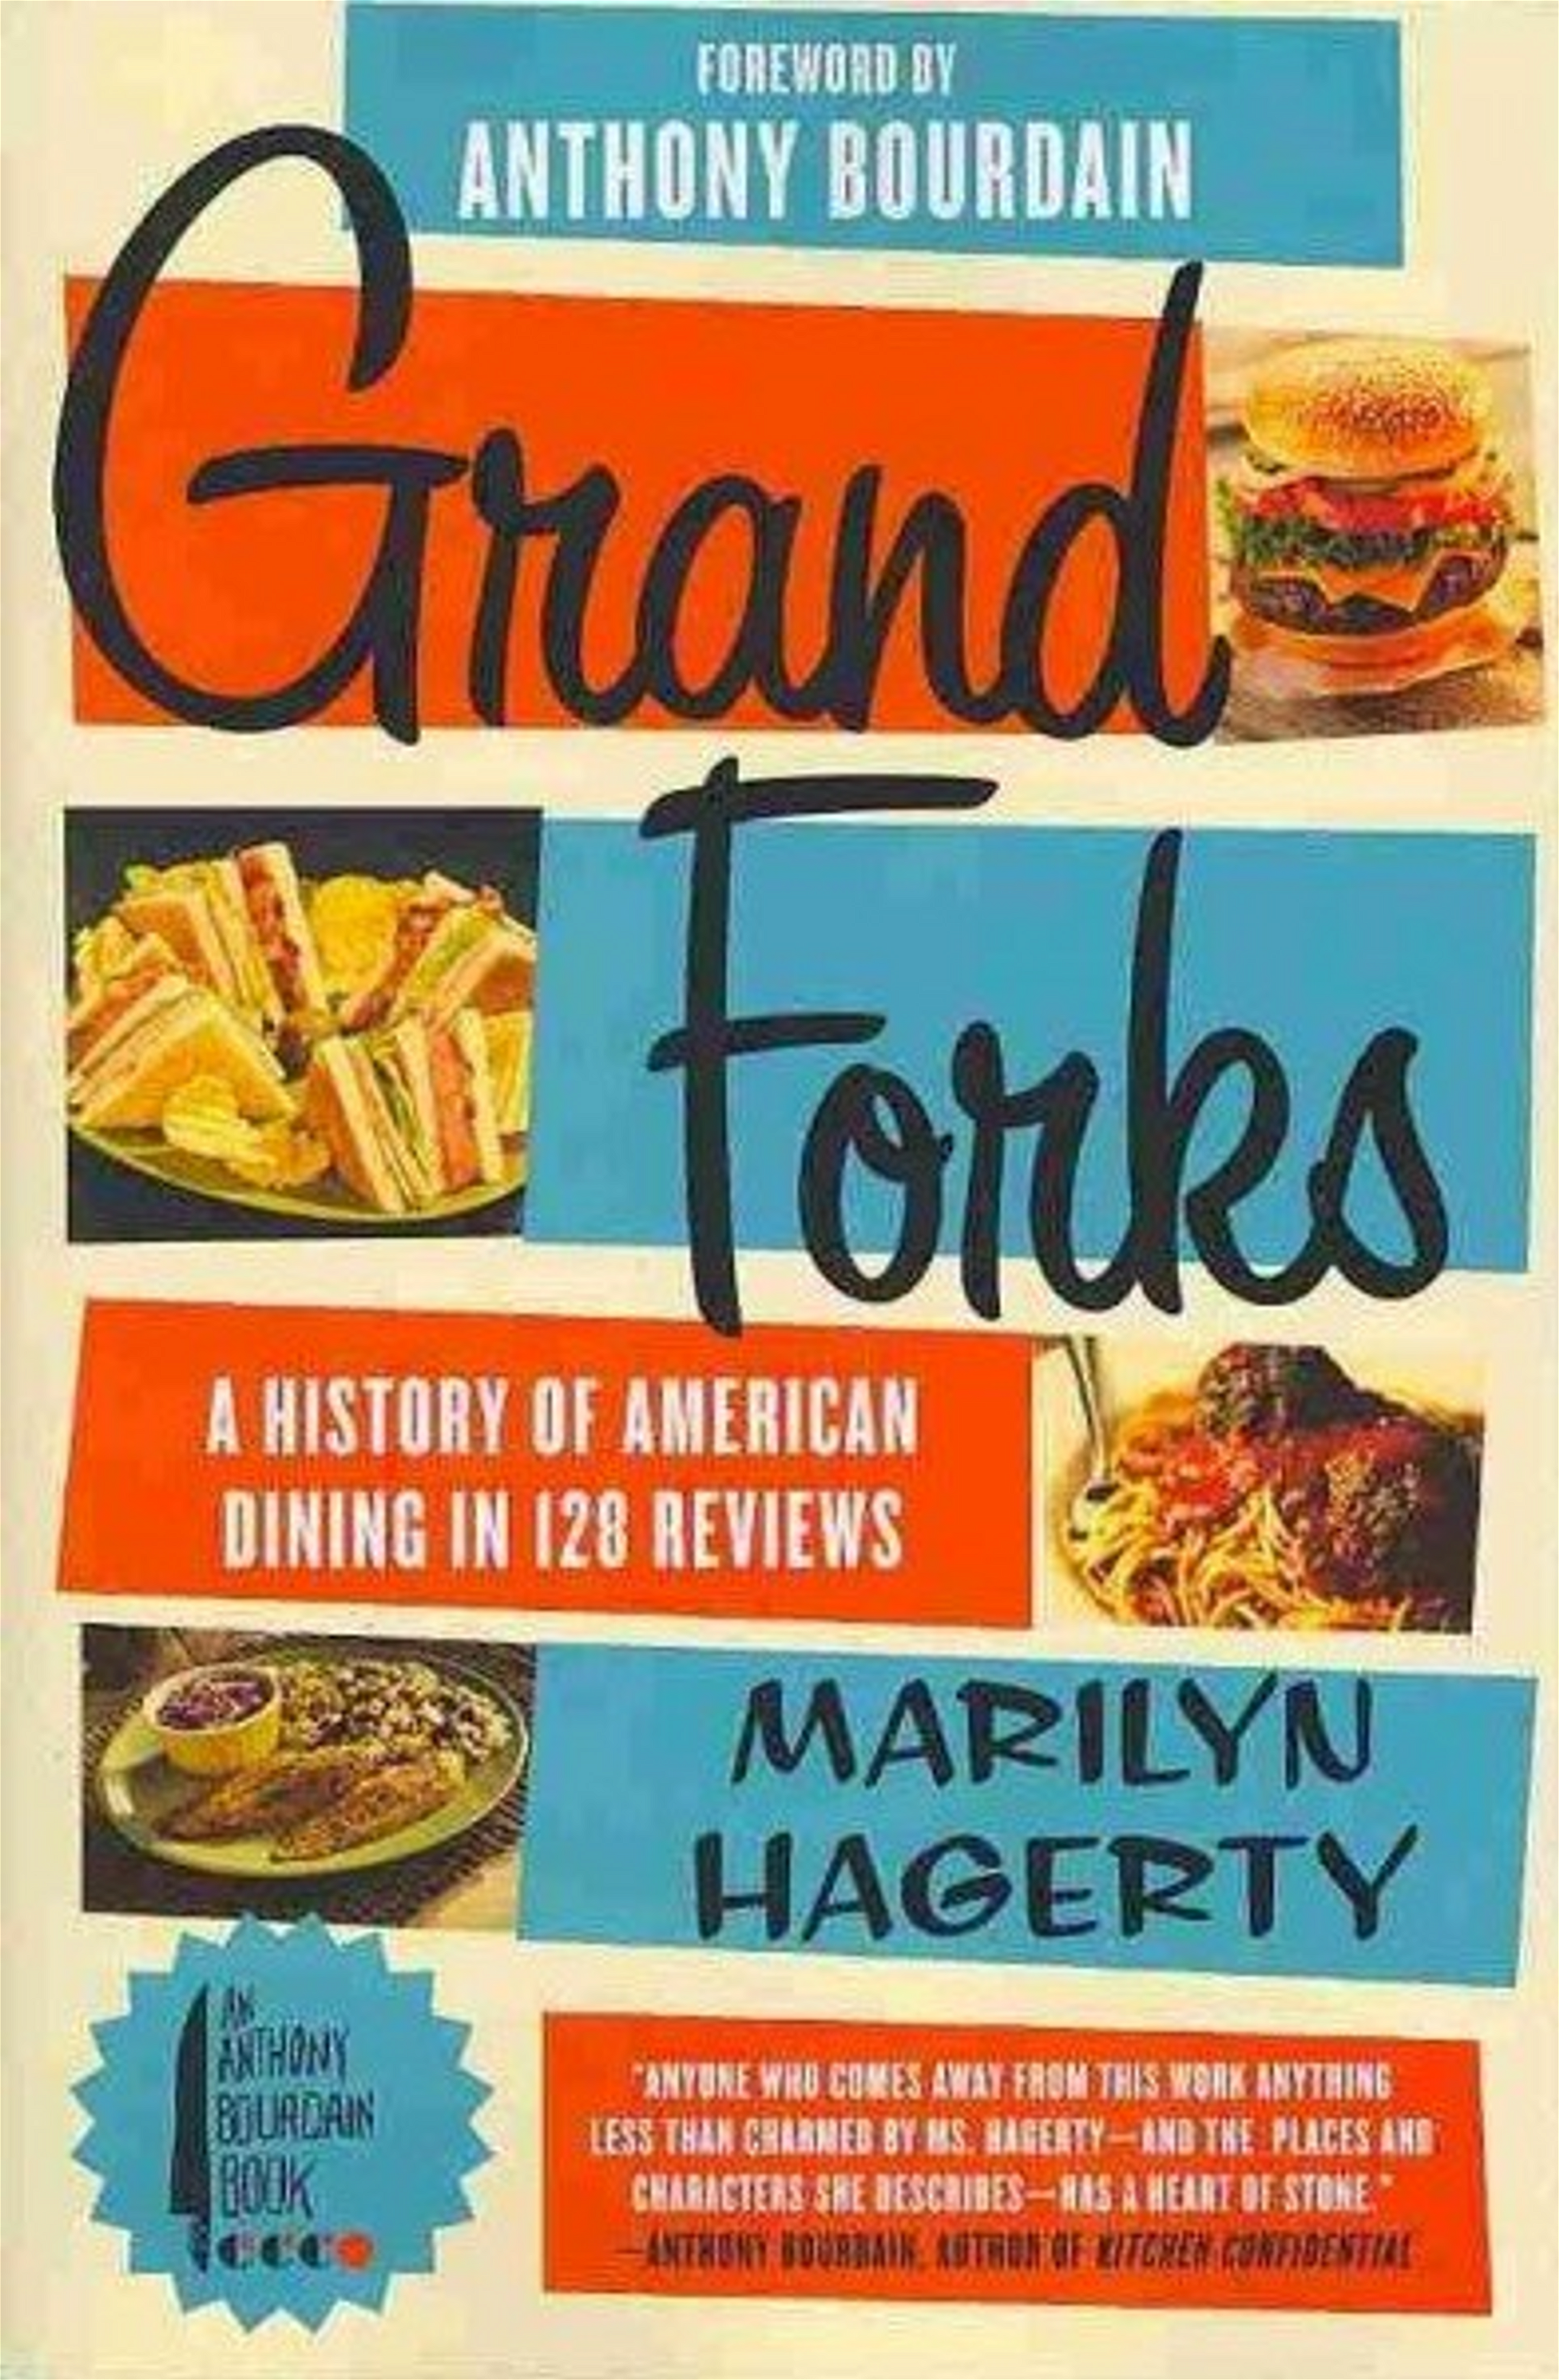 Grand Forks: A History of American Dining in 128 Reviews